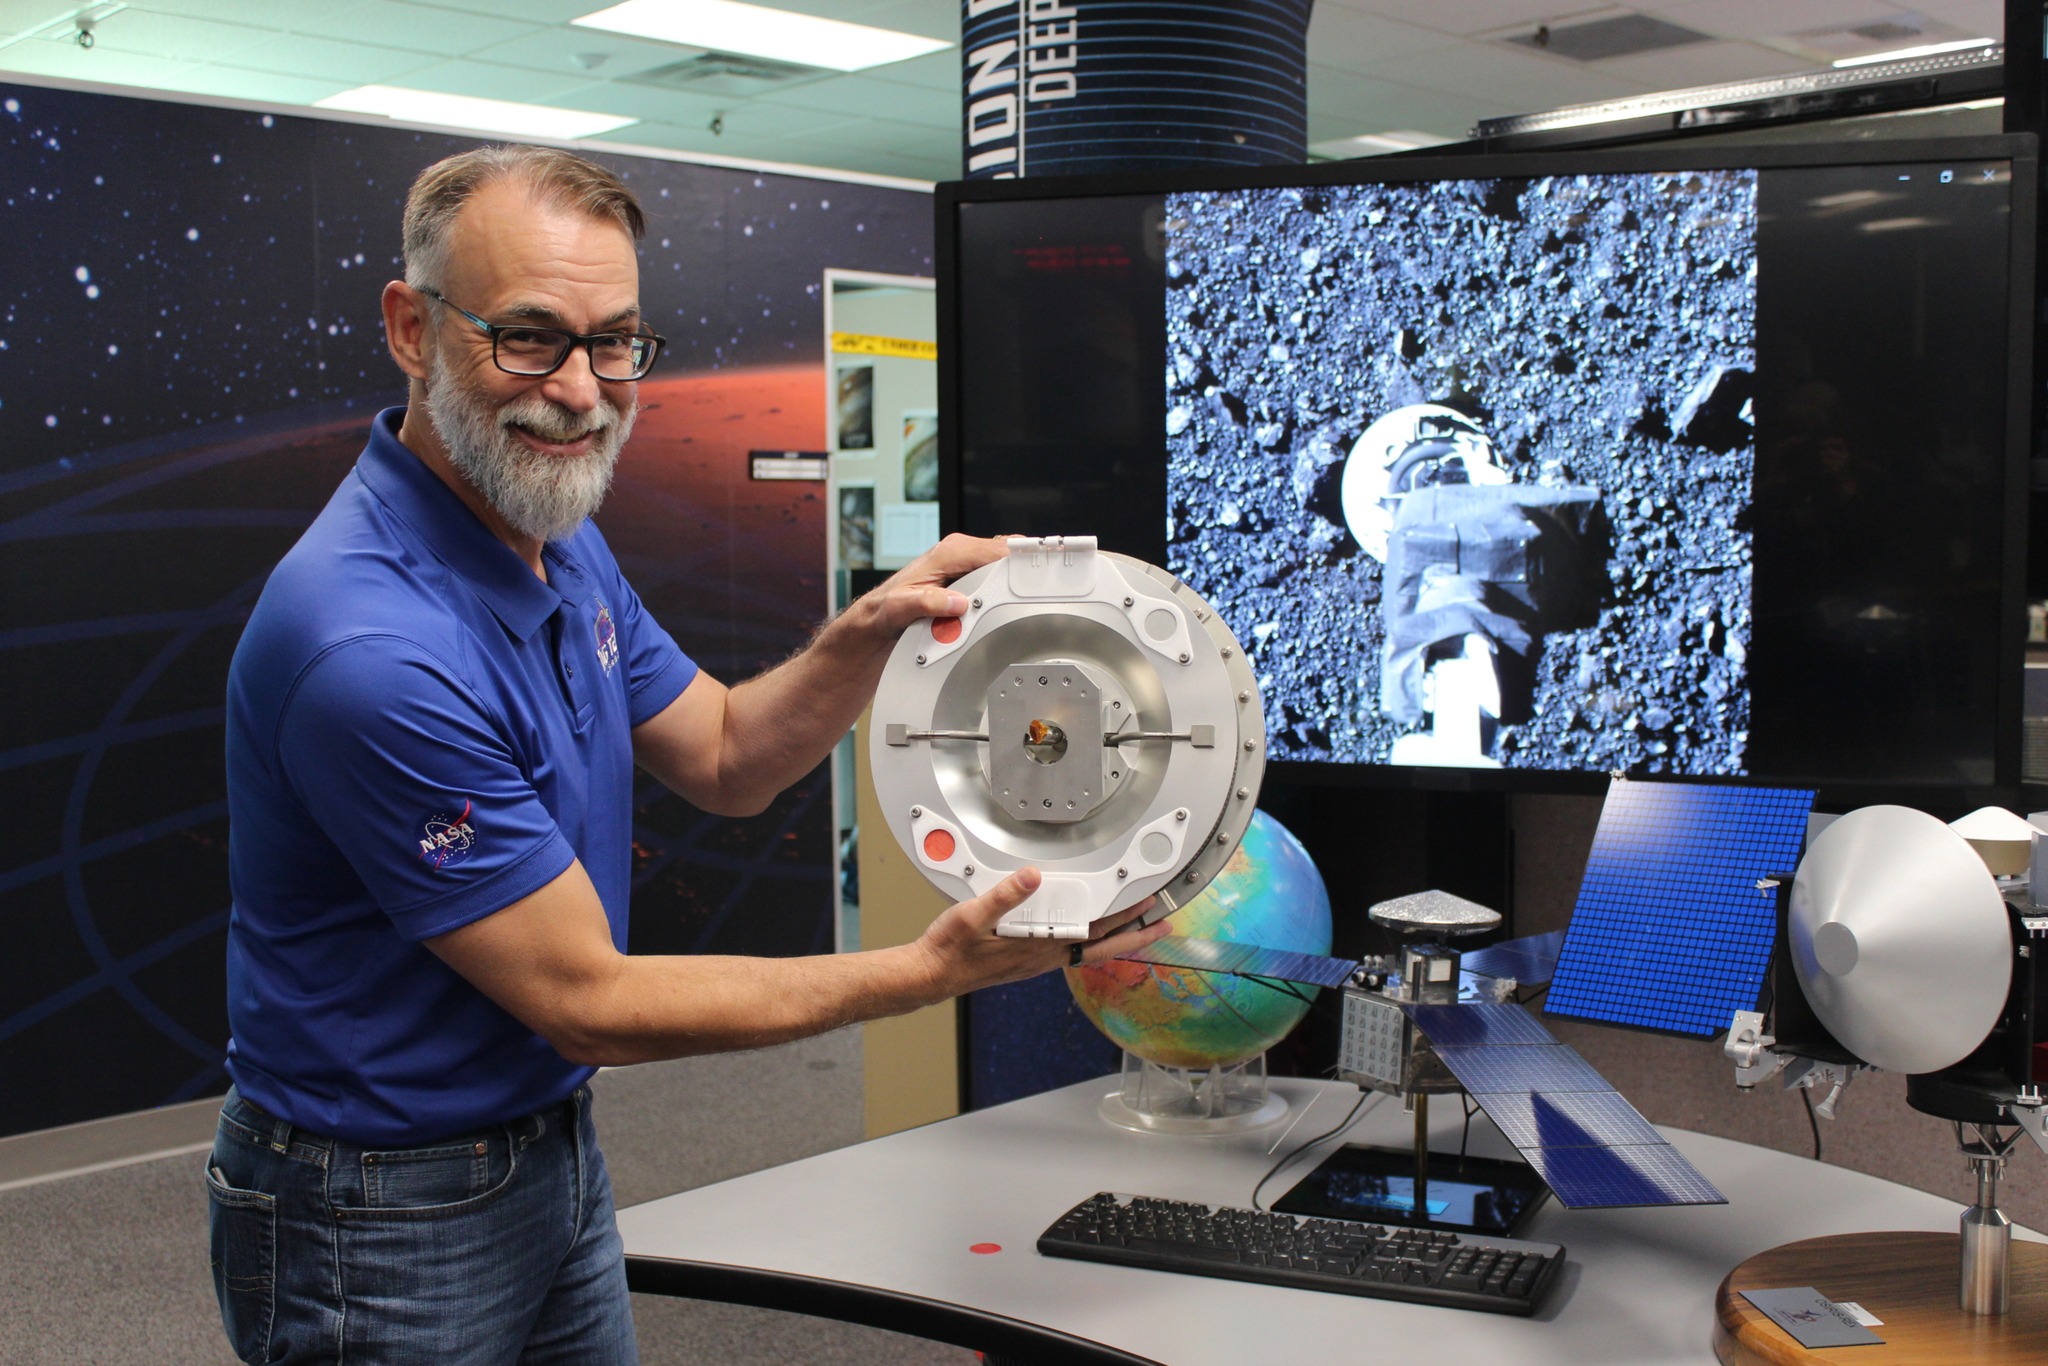 A scientist in a blue shirt and glasses holds a metal disk